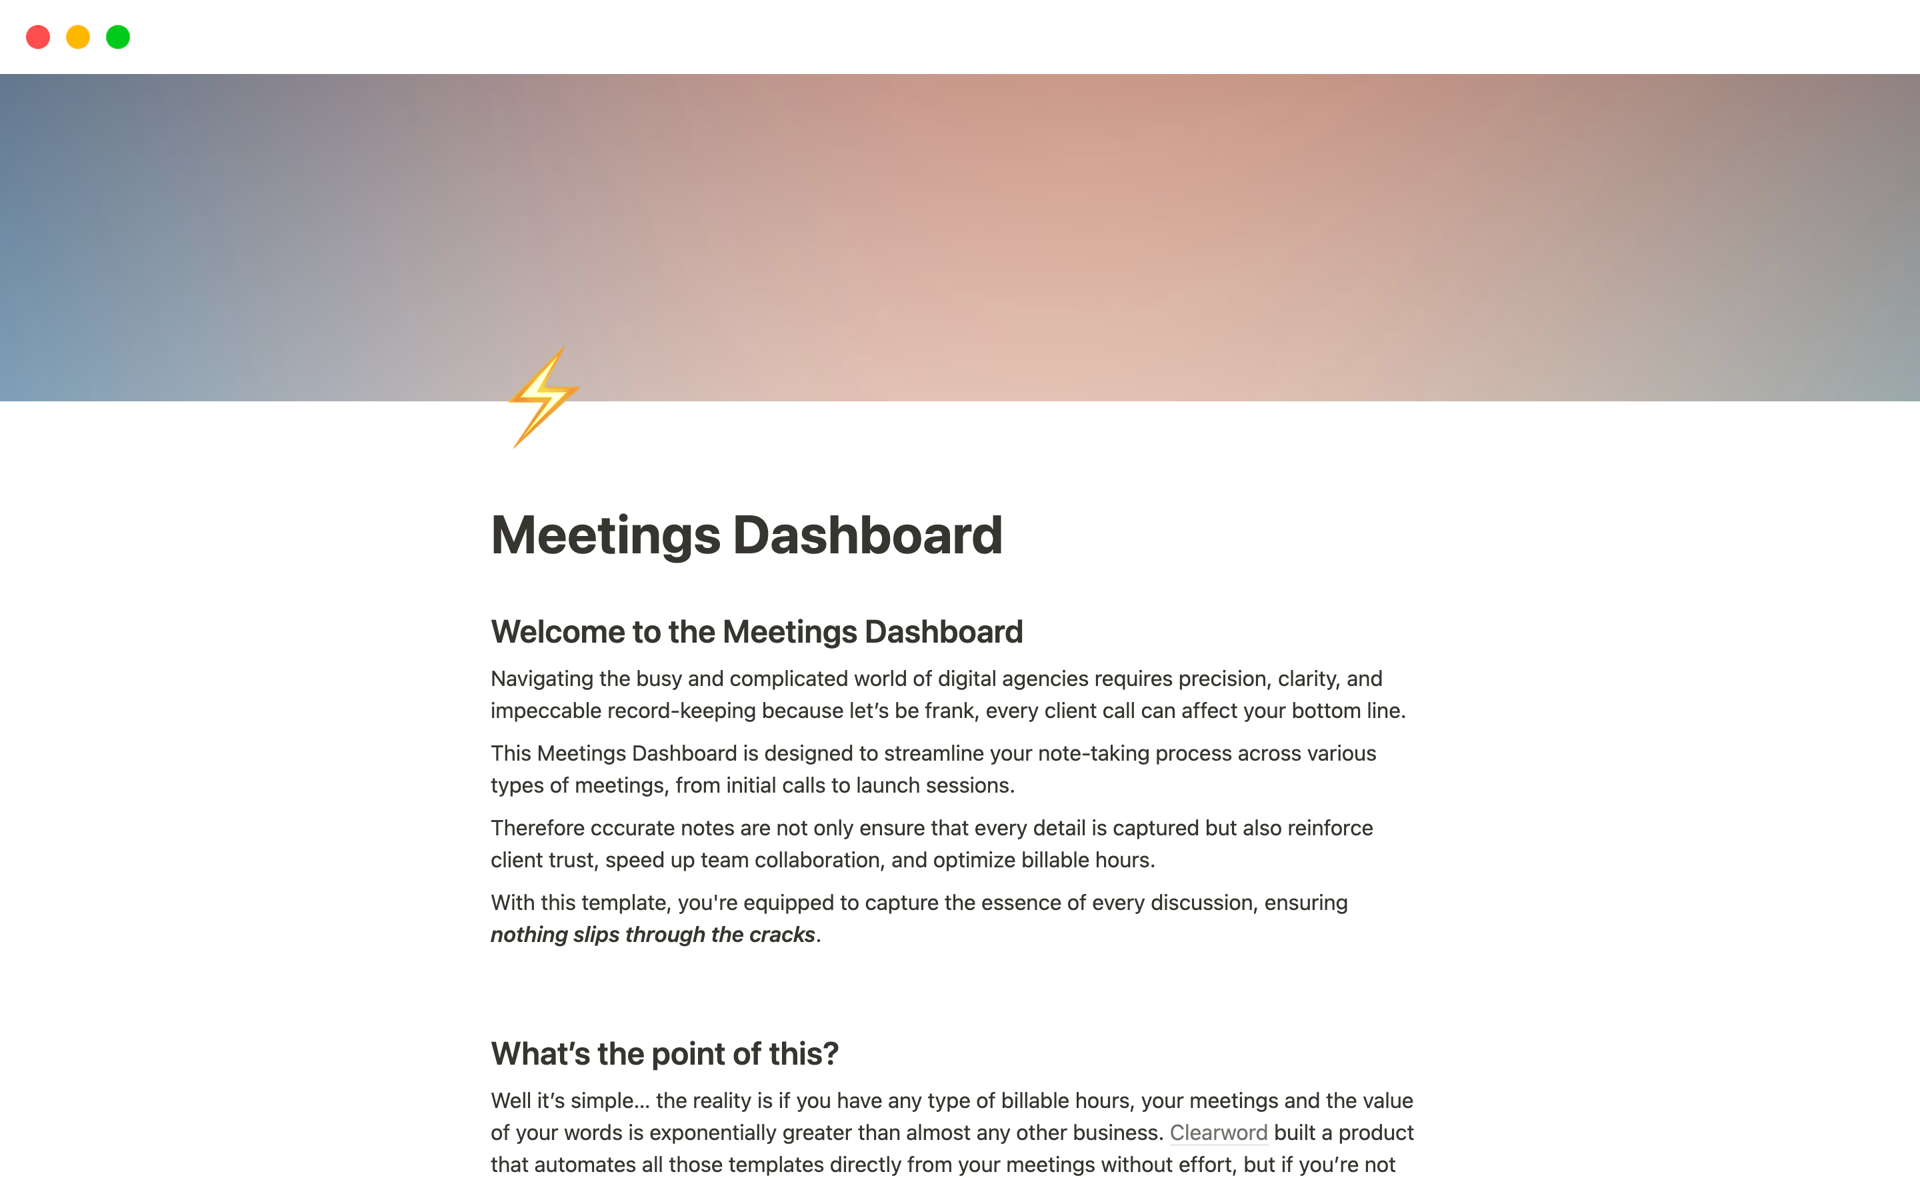 A set of built meeting minutes templates to help agencies turn conversations into more revenue.